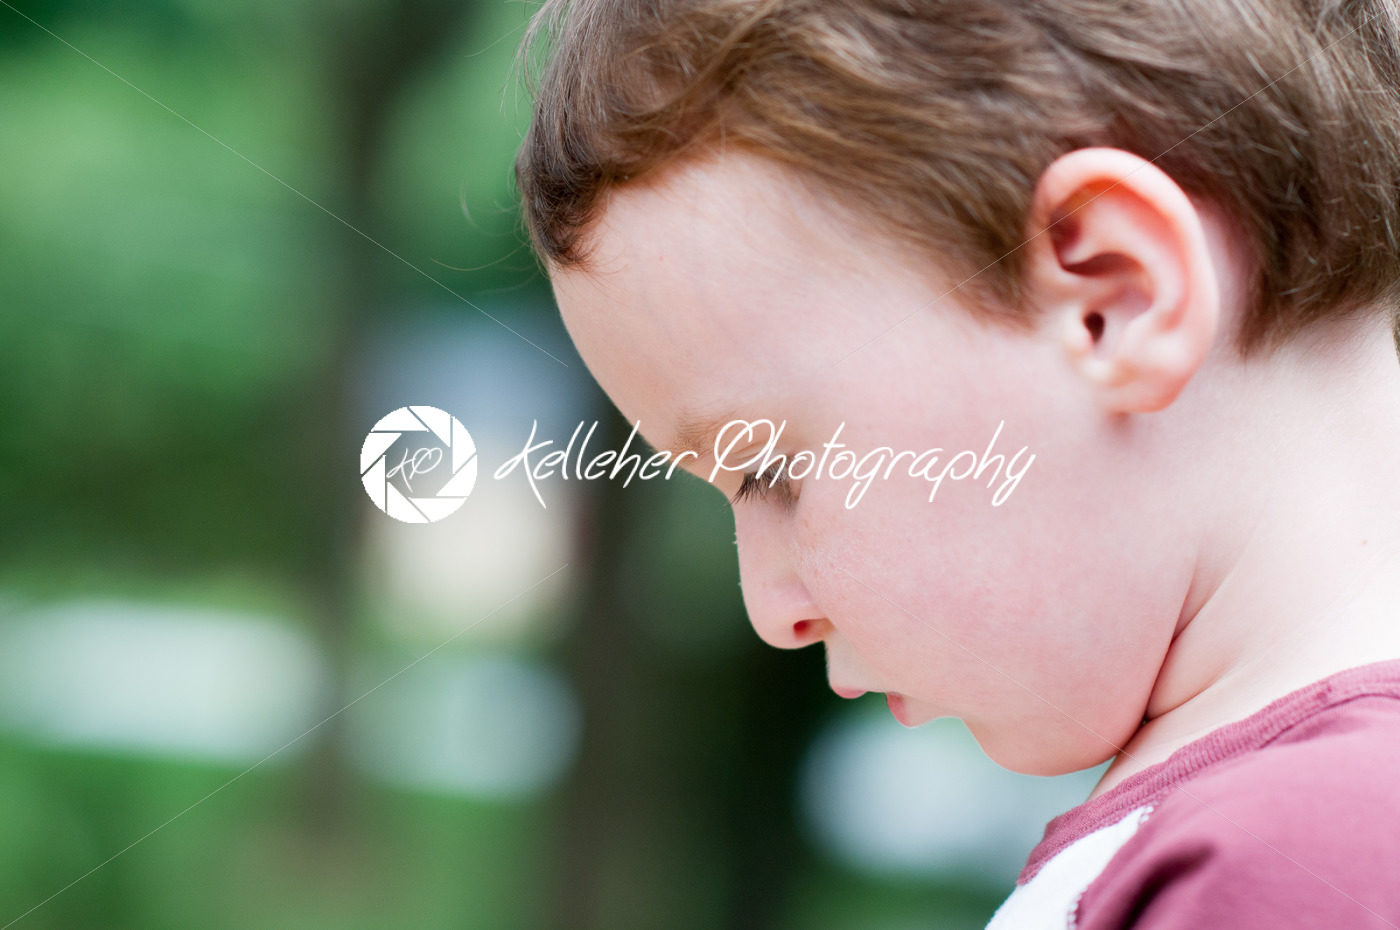 Young boy playing outside in back yard - Kelleher Photography Store